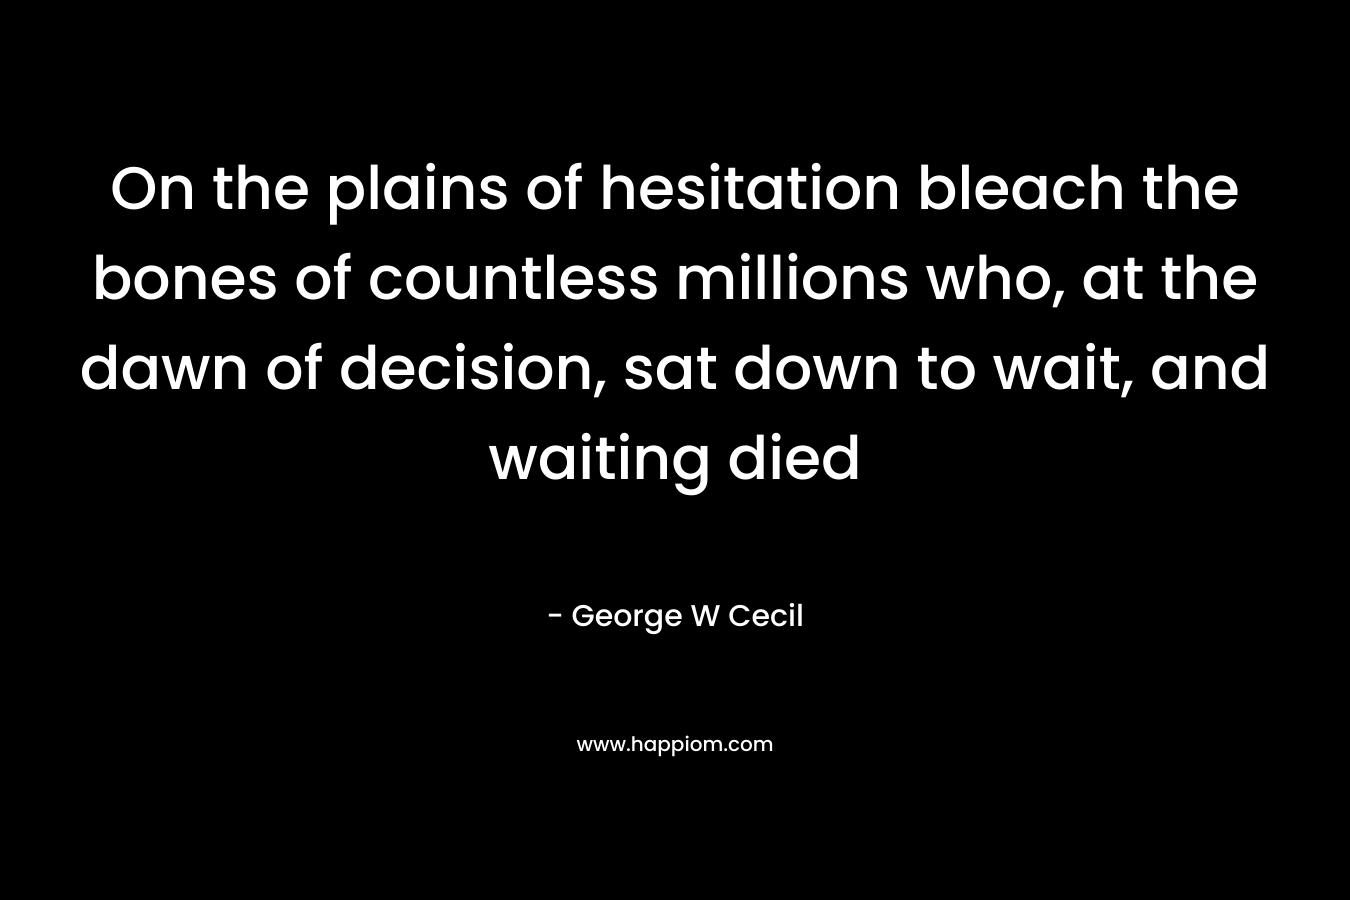 On the plains of hesitation bleach the bones of countless millions who, at the dawn of decision, sat down to wait, and waiting died – George W Cecil